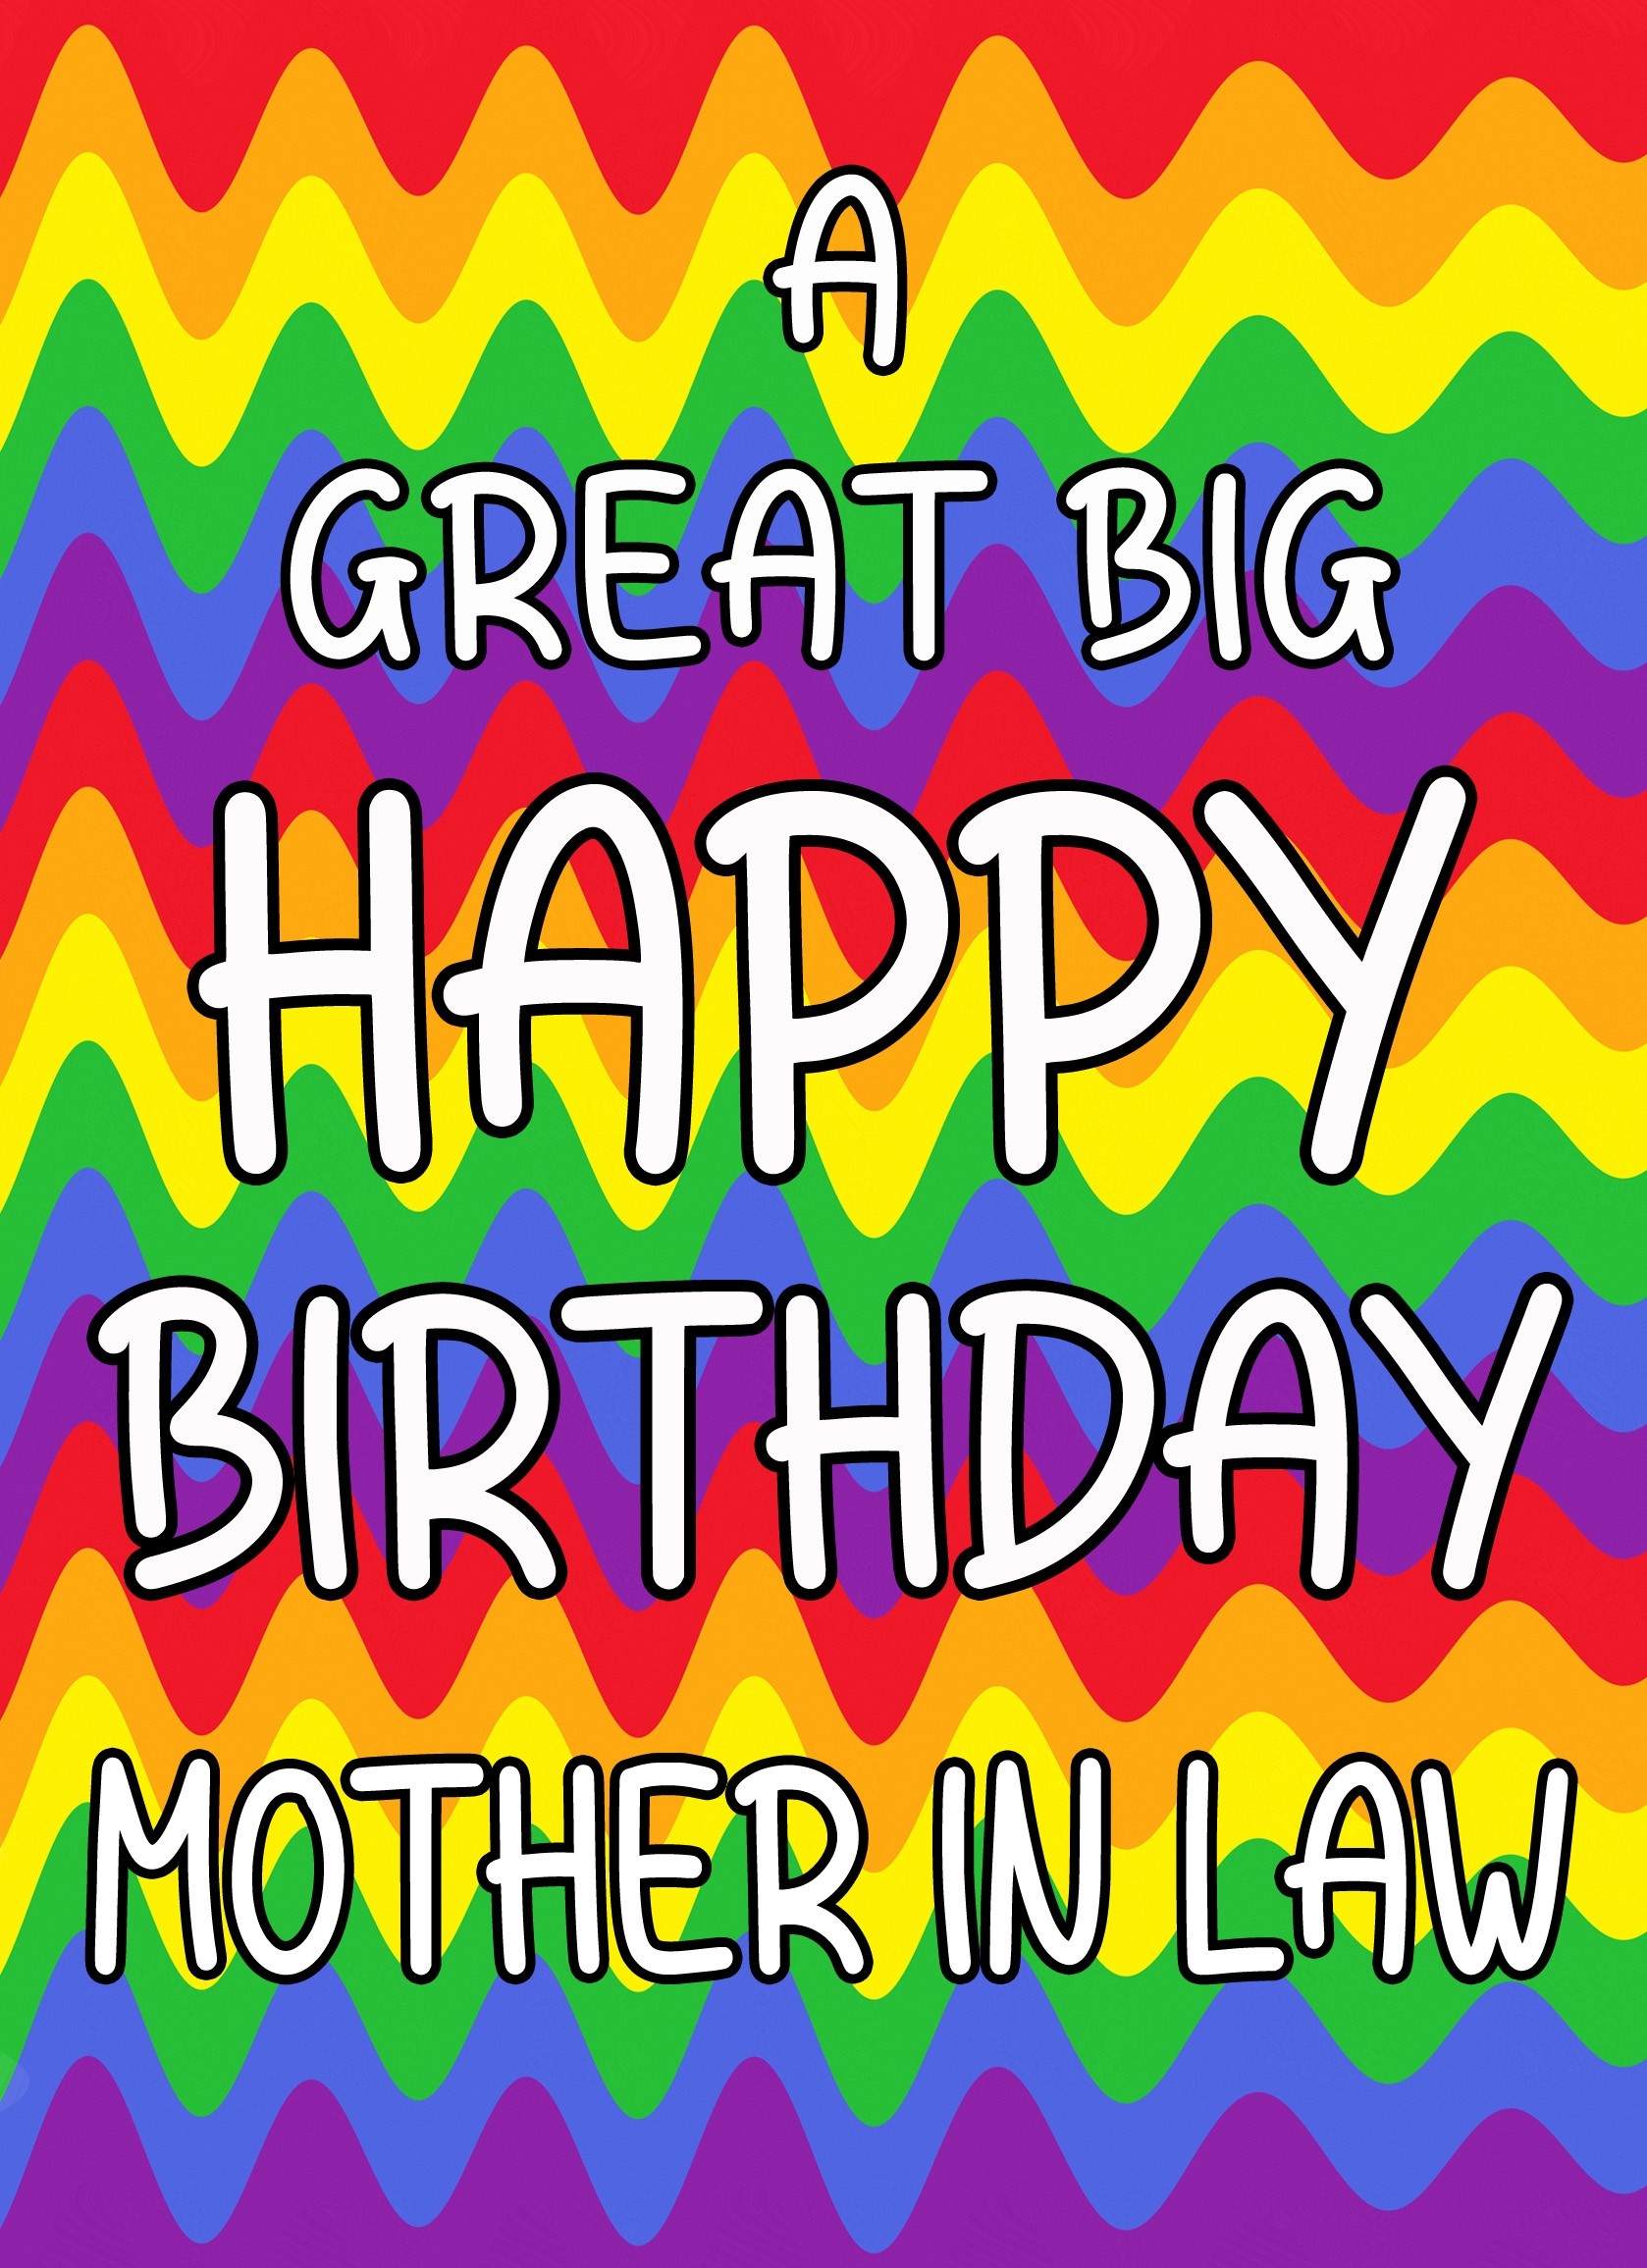 Happy Birthday 'Mother in Law' Greeting Card (Rainbow)